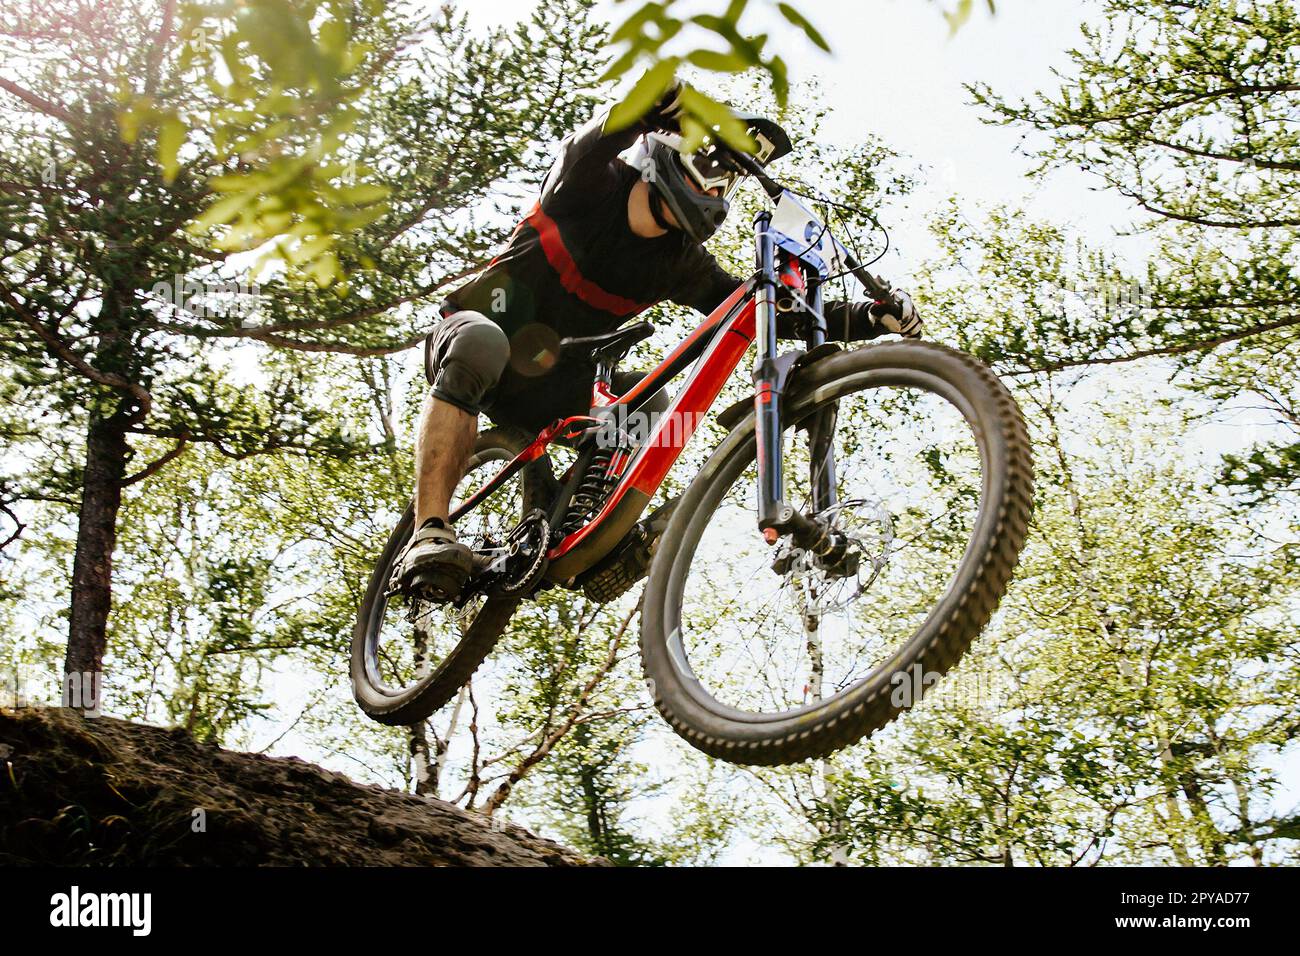 male racer jumping steep descent bottom view, downhill race, summer mountainbike championship Stock Photo